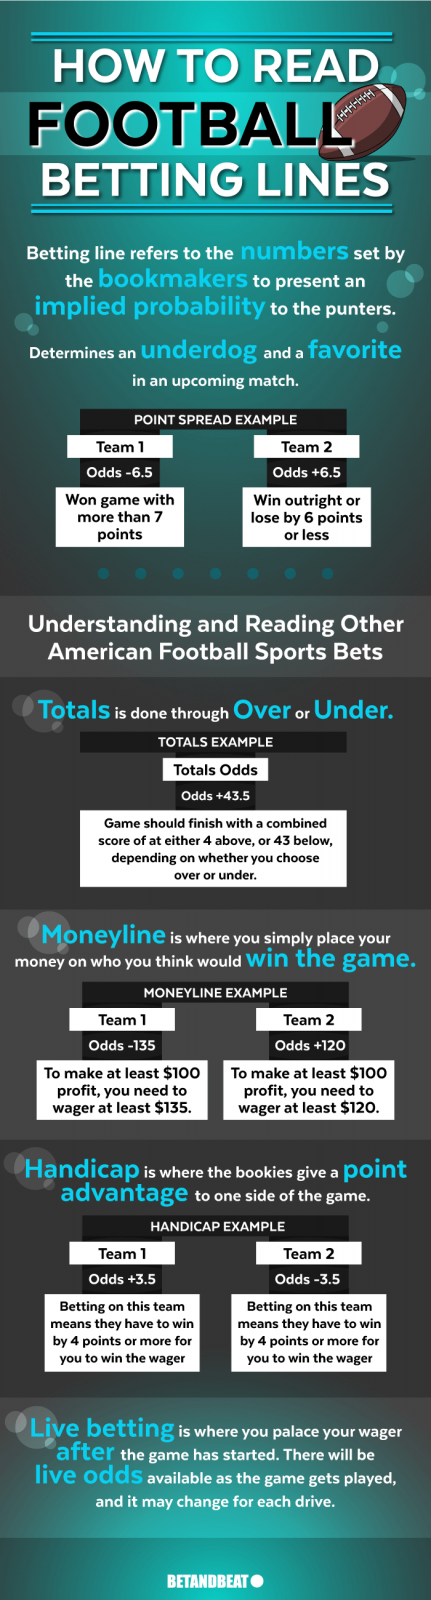 How to Read Football Betting LInes